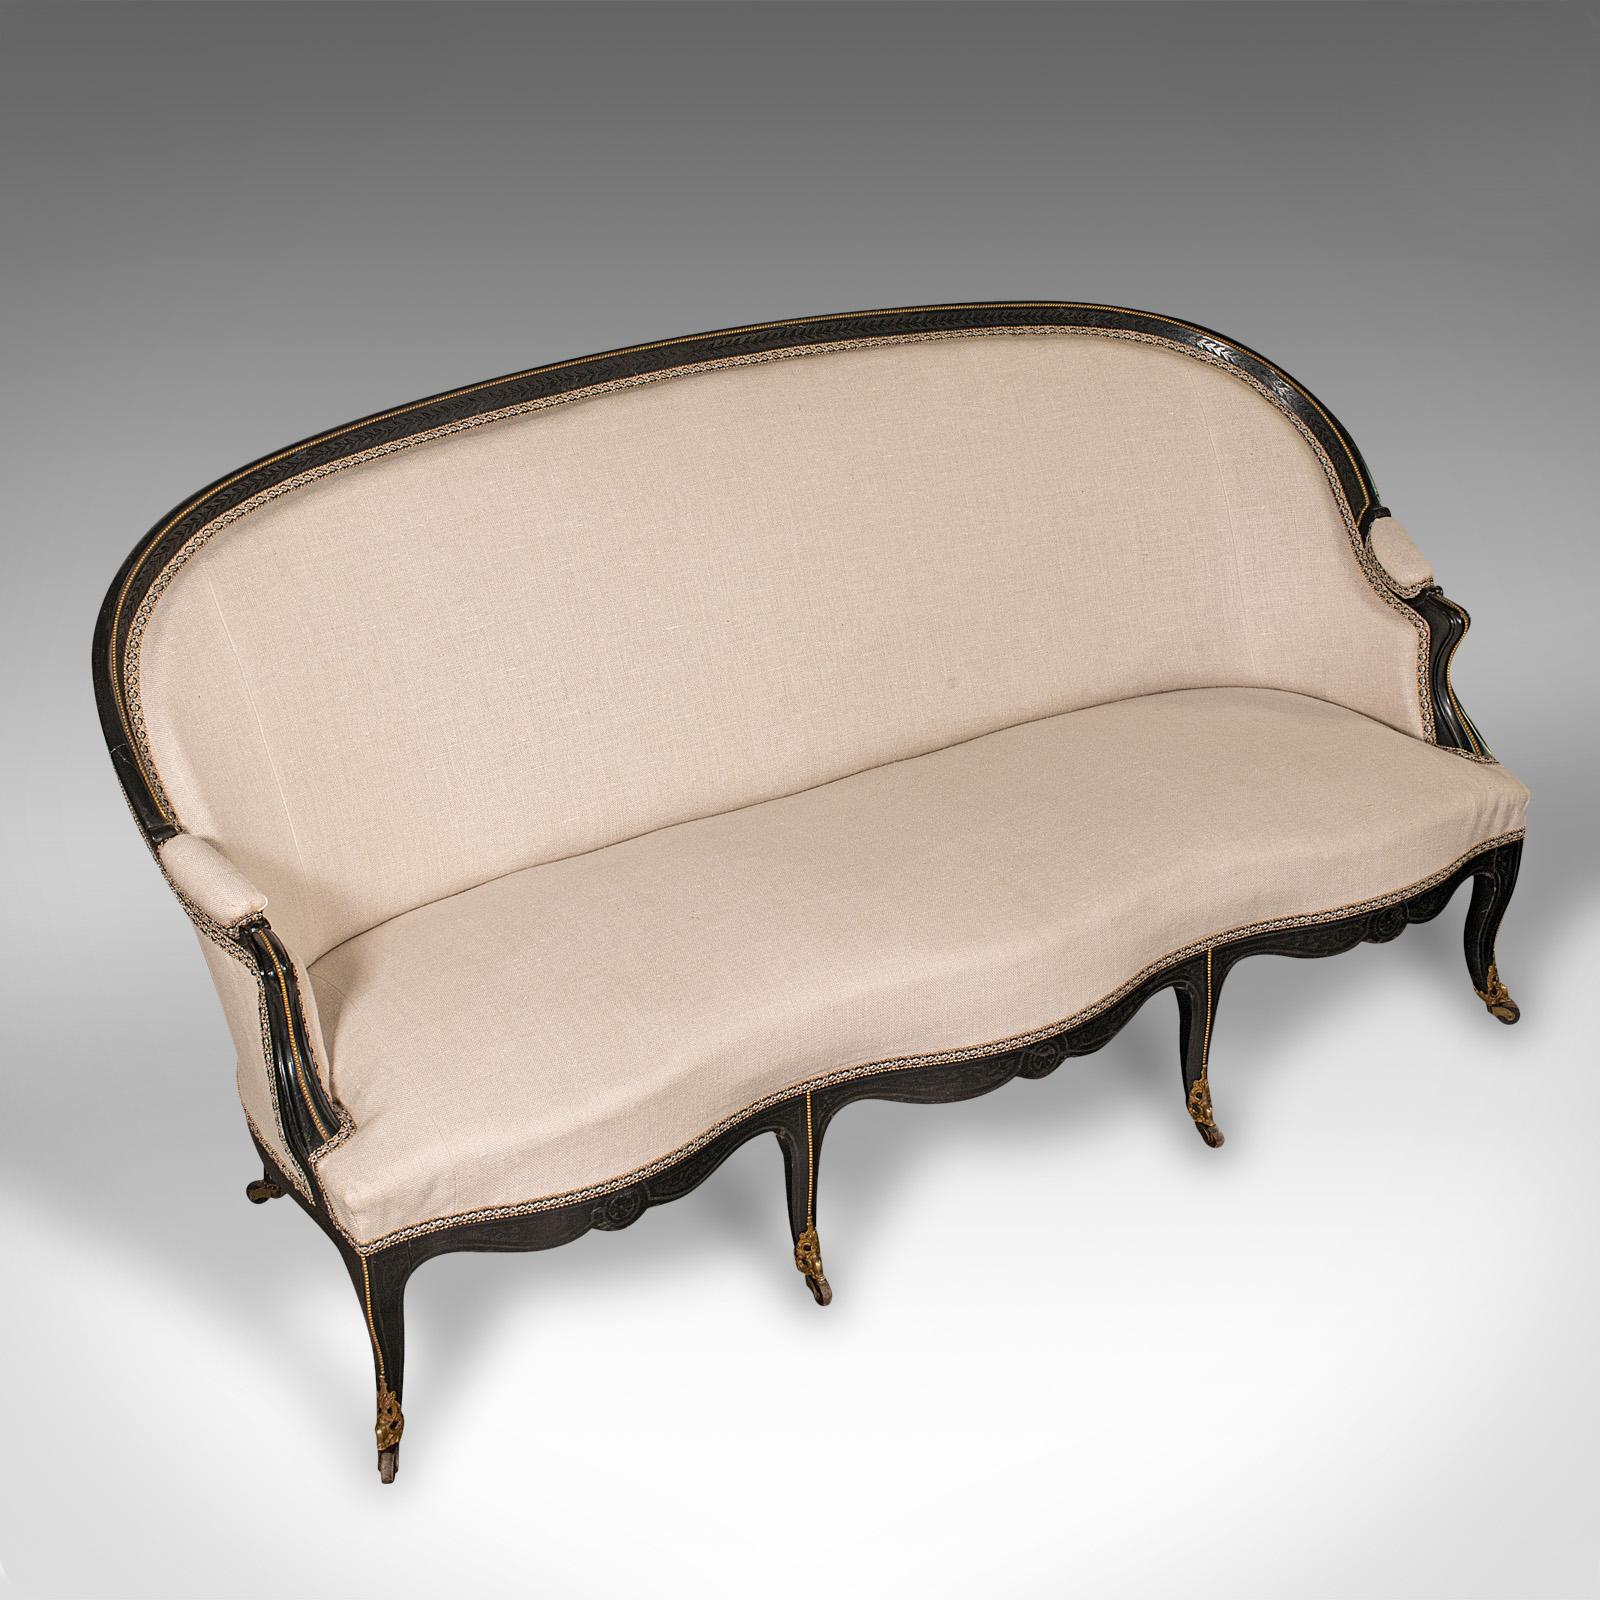 19th Century Antique Canape Sofa, Continental, Wing Settee, 3 Seat, Louis XV, Victorian, 1870 For Sale